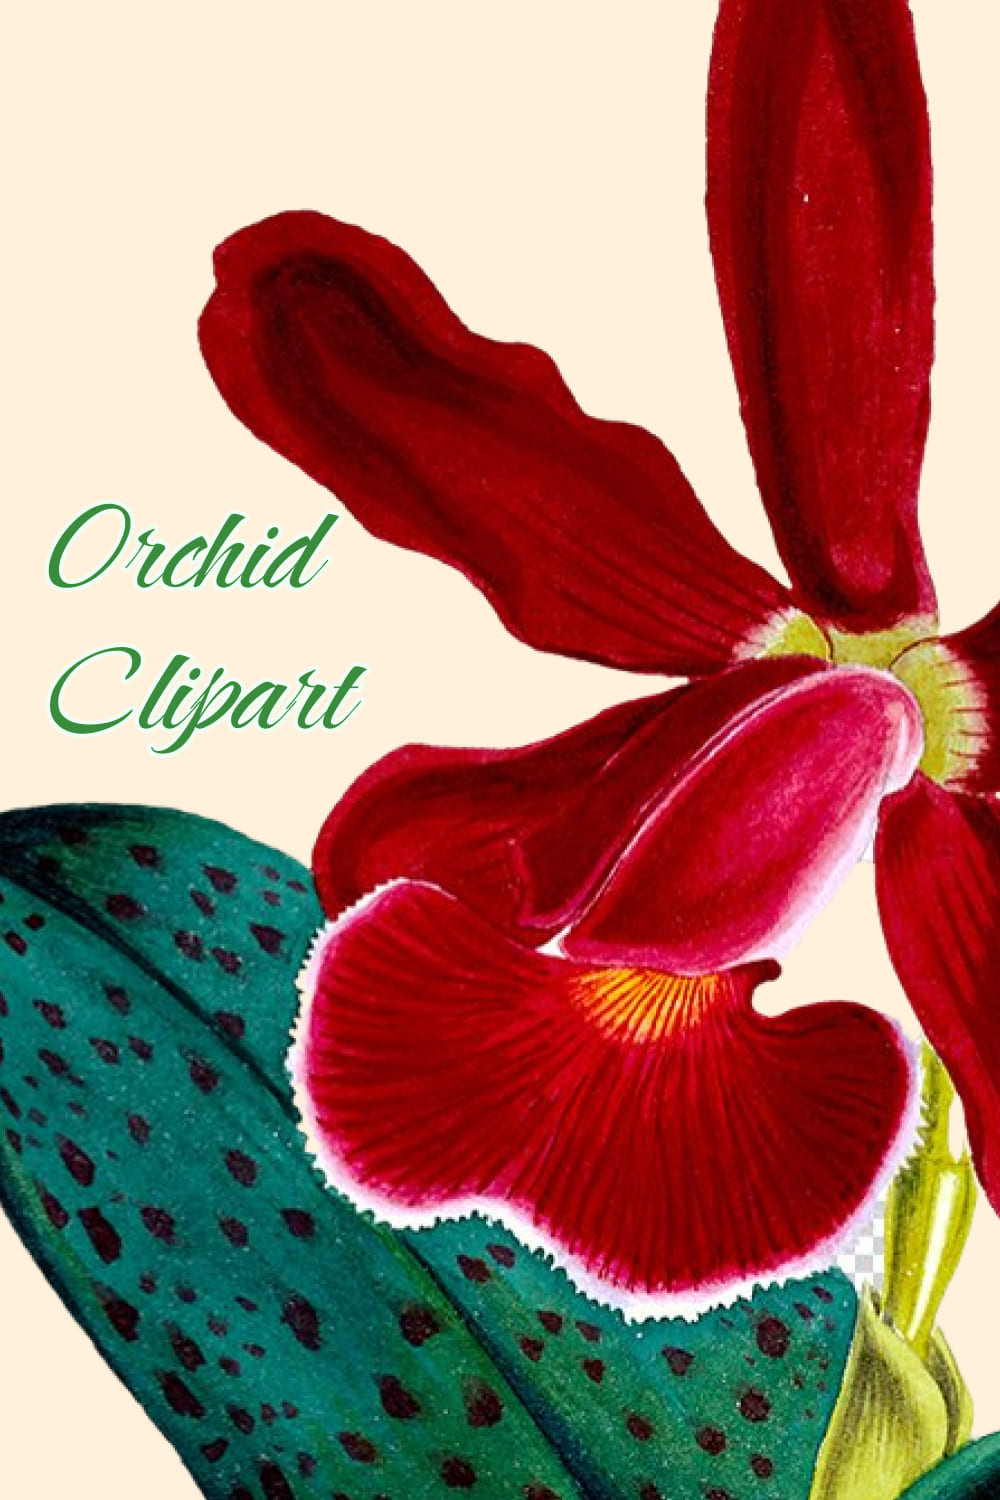 Orchid Clipart - preview image.